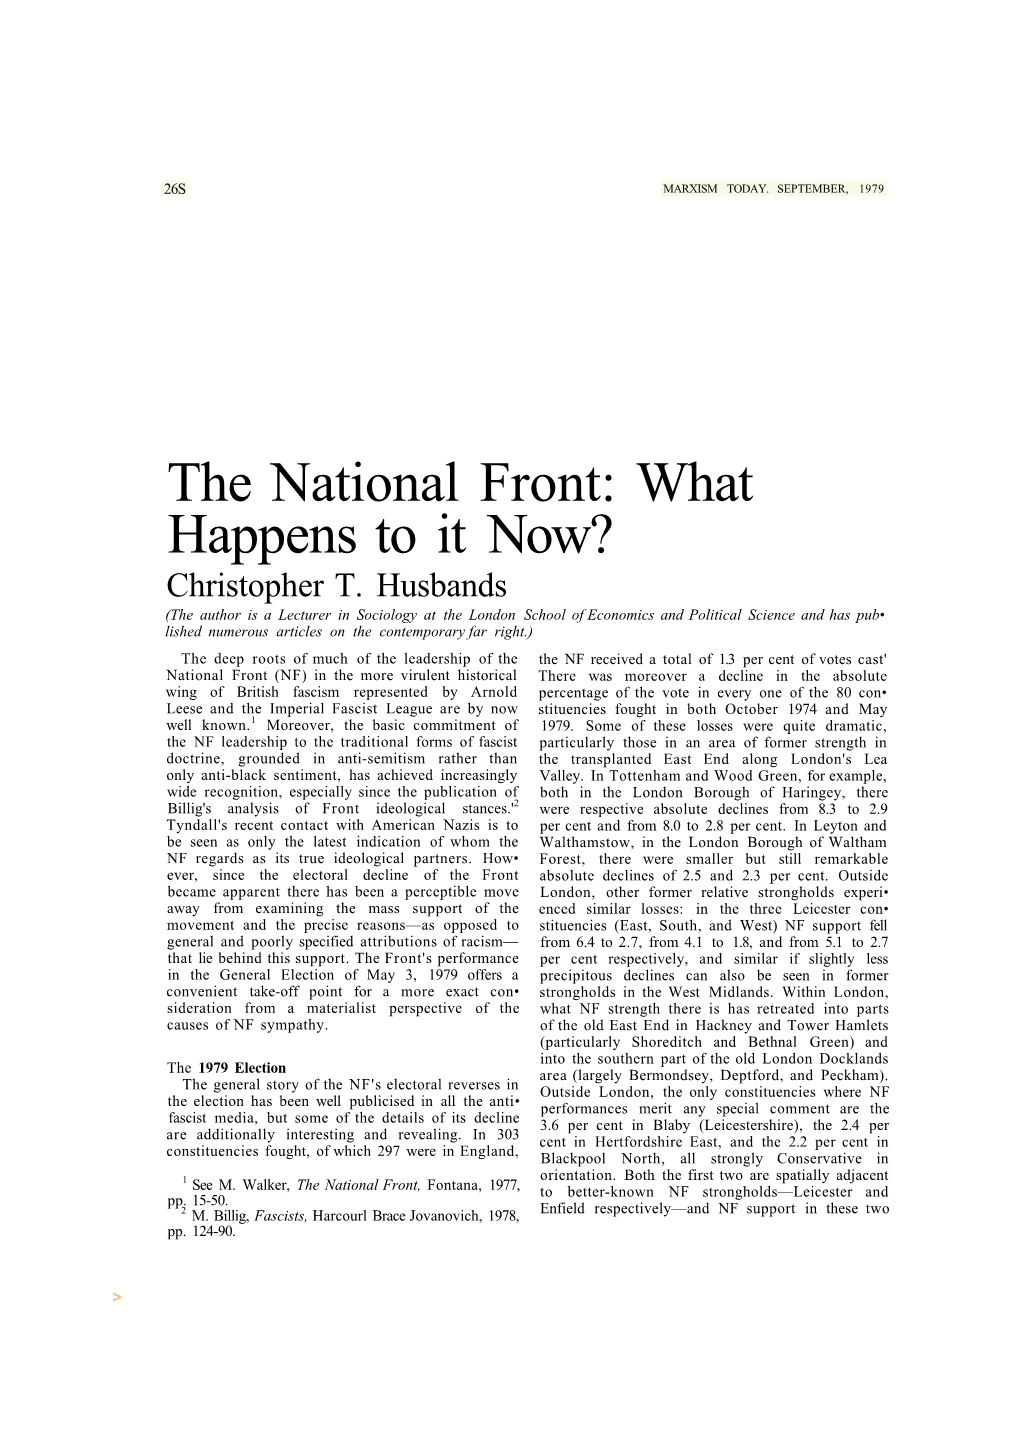 The National Front: What Happens to It Now? Christopher T